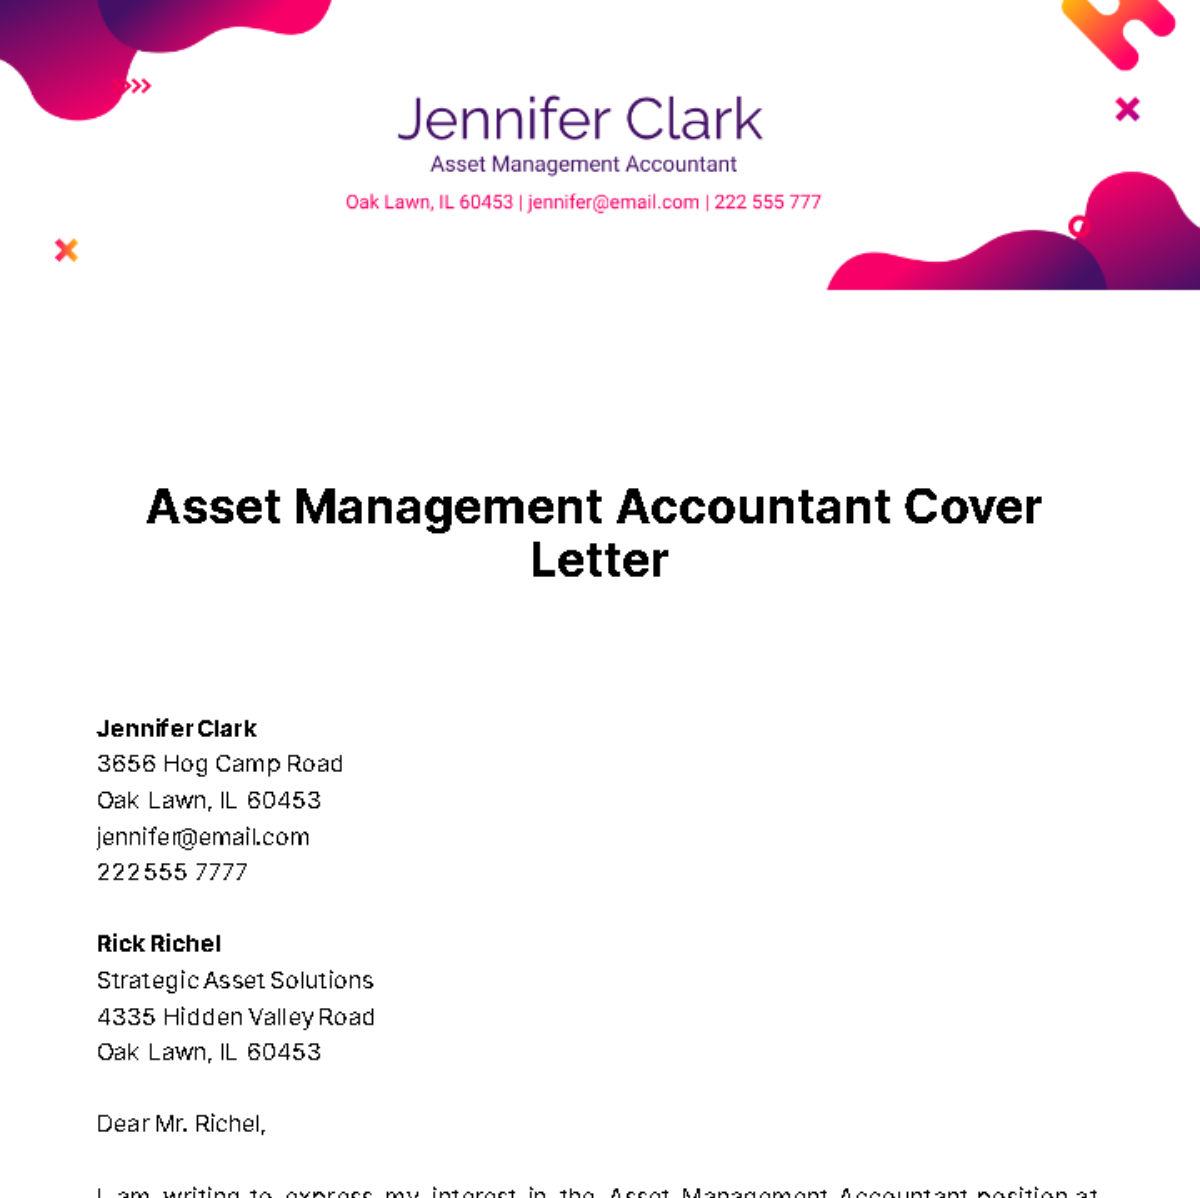 Asset Management Accountant Cover Letter Template